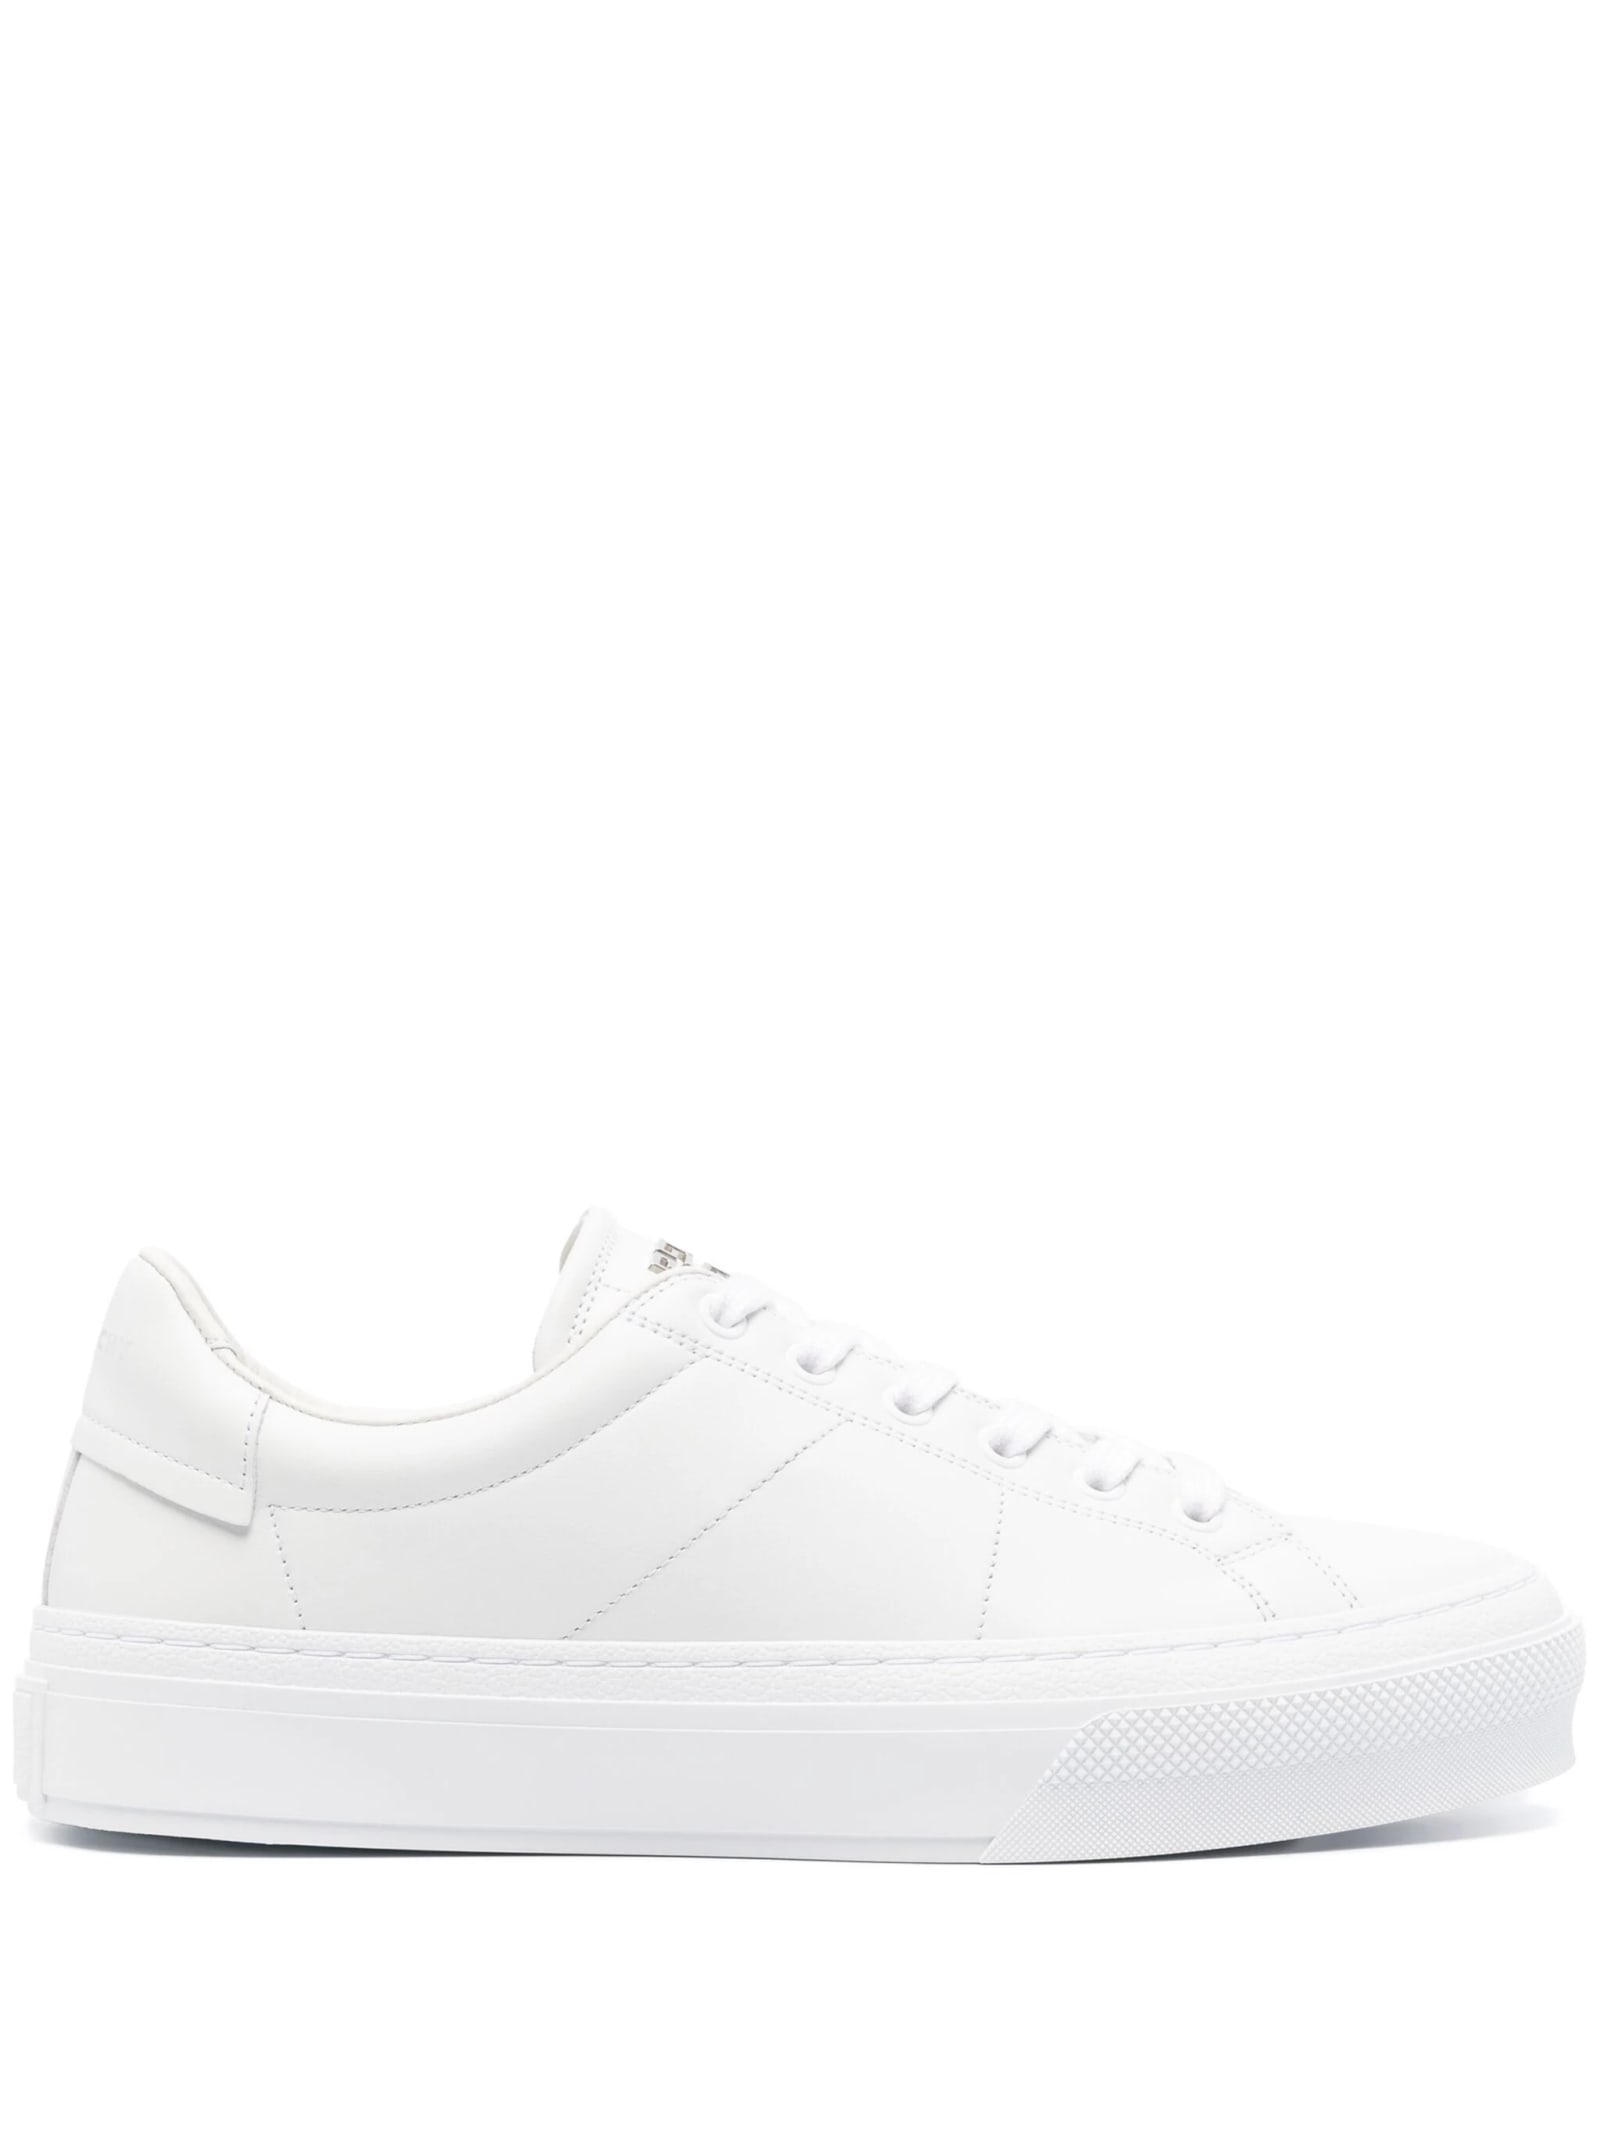 Givenchy White Leather City Sport Sneakers